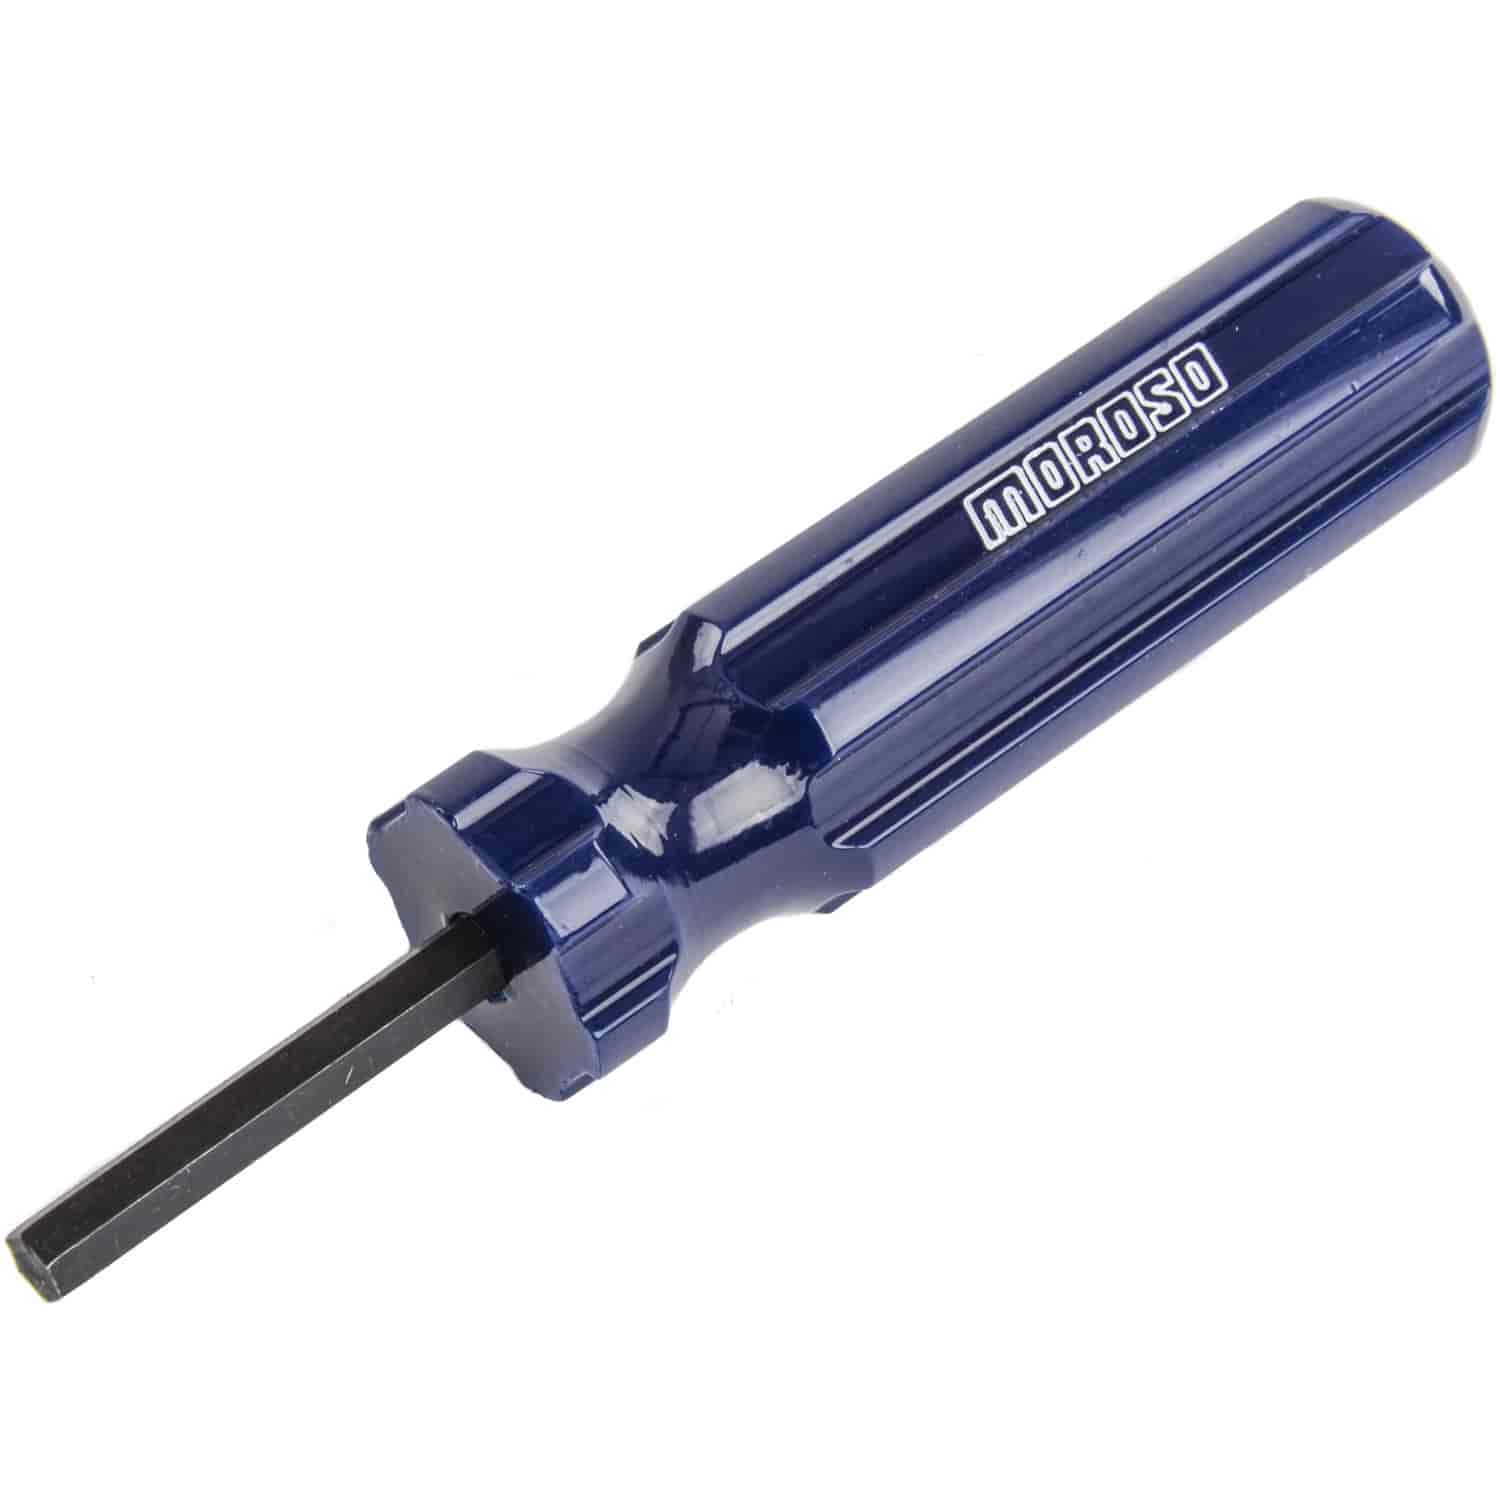 Quick Fastener Wrench With Easy-Grip Handle 3/16" Hex Head